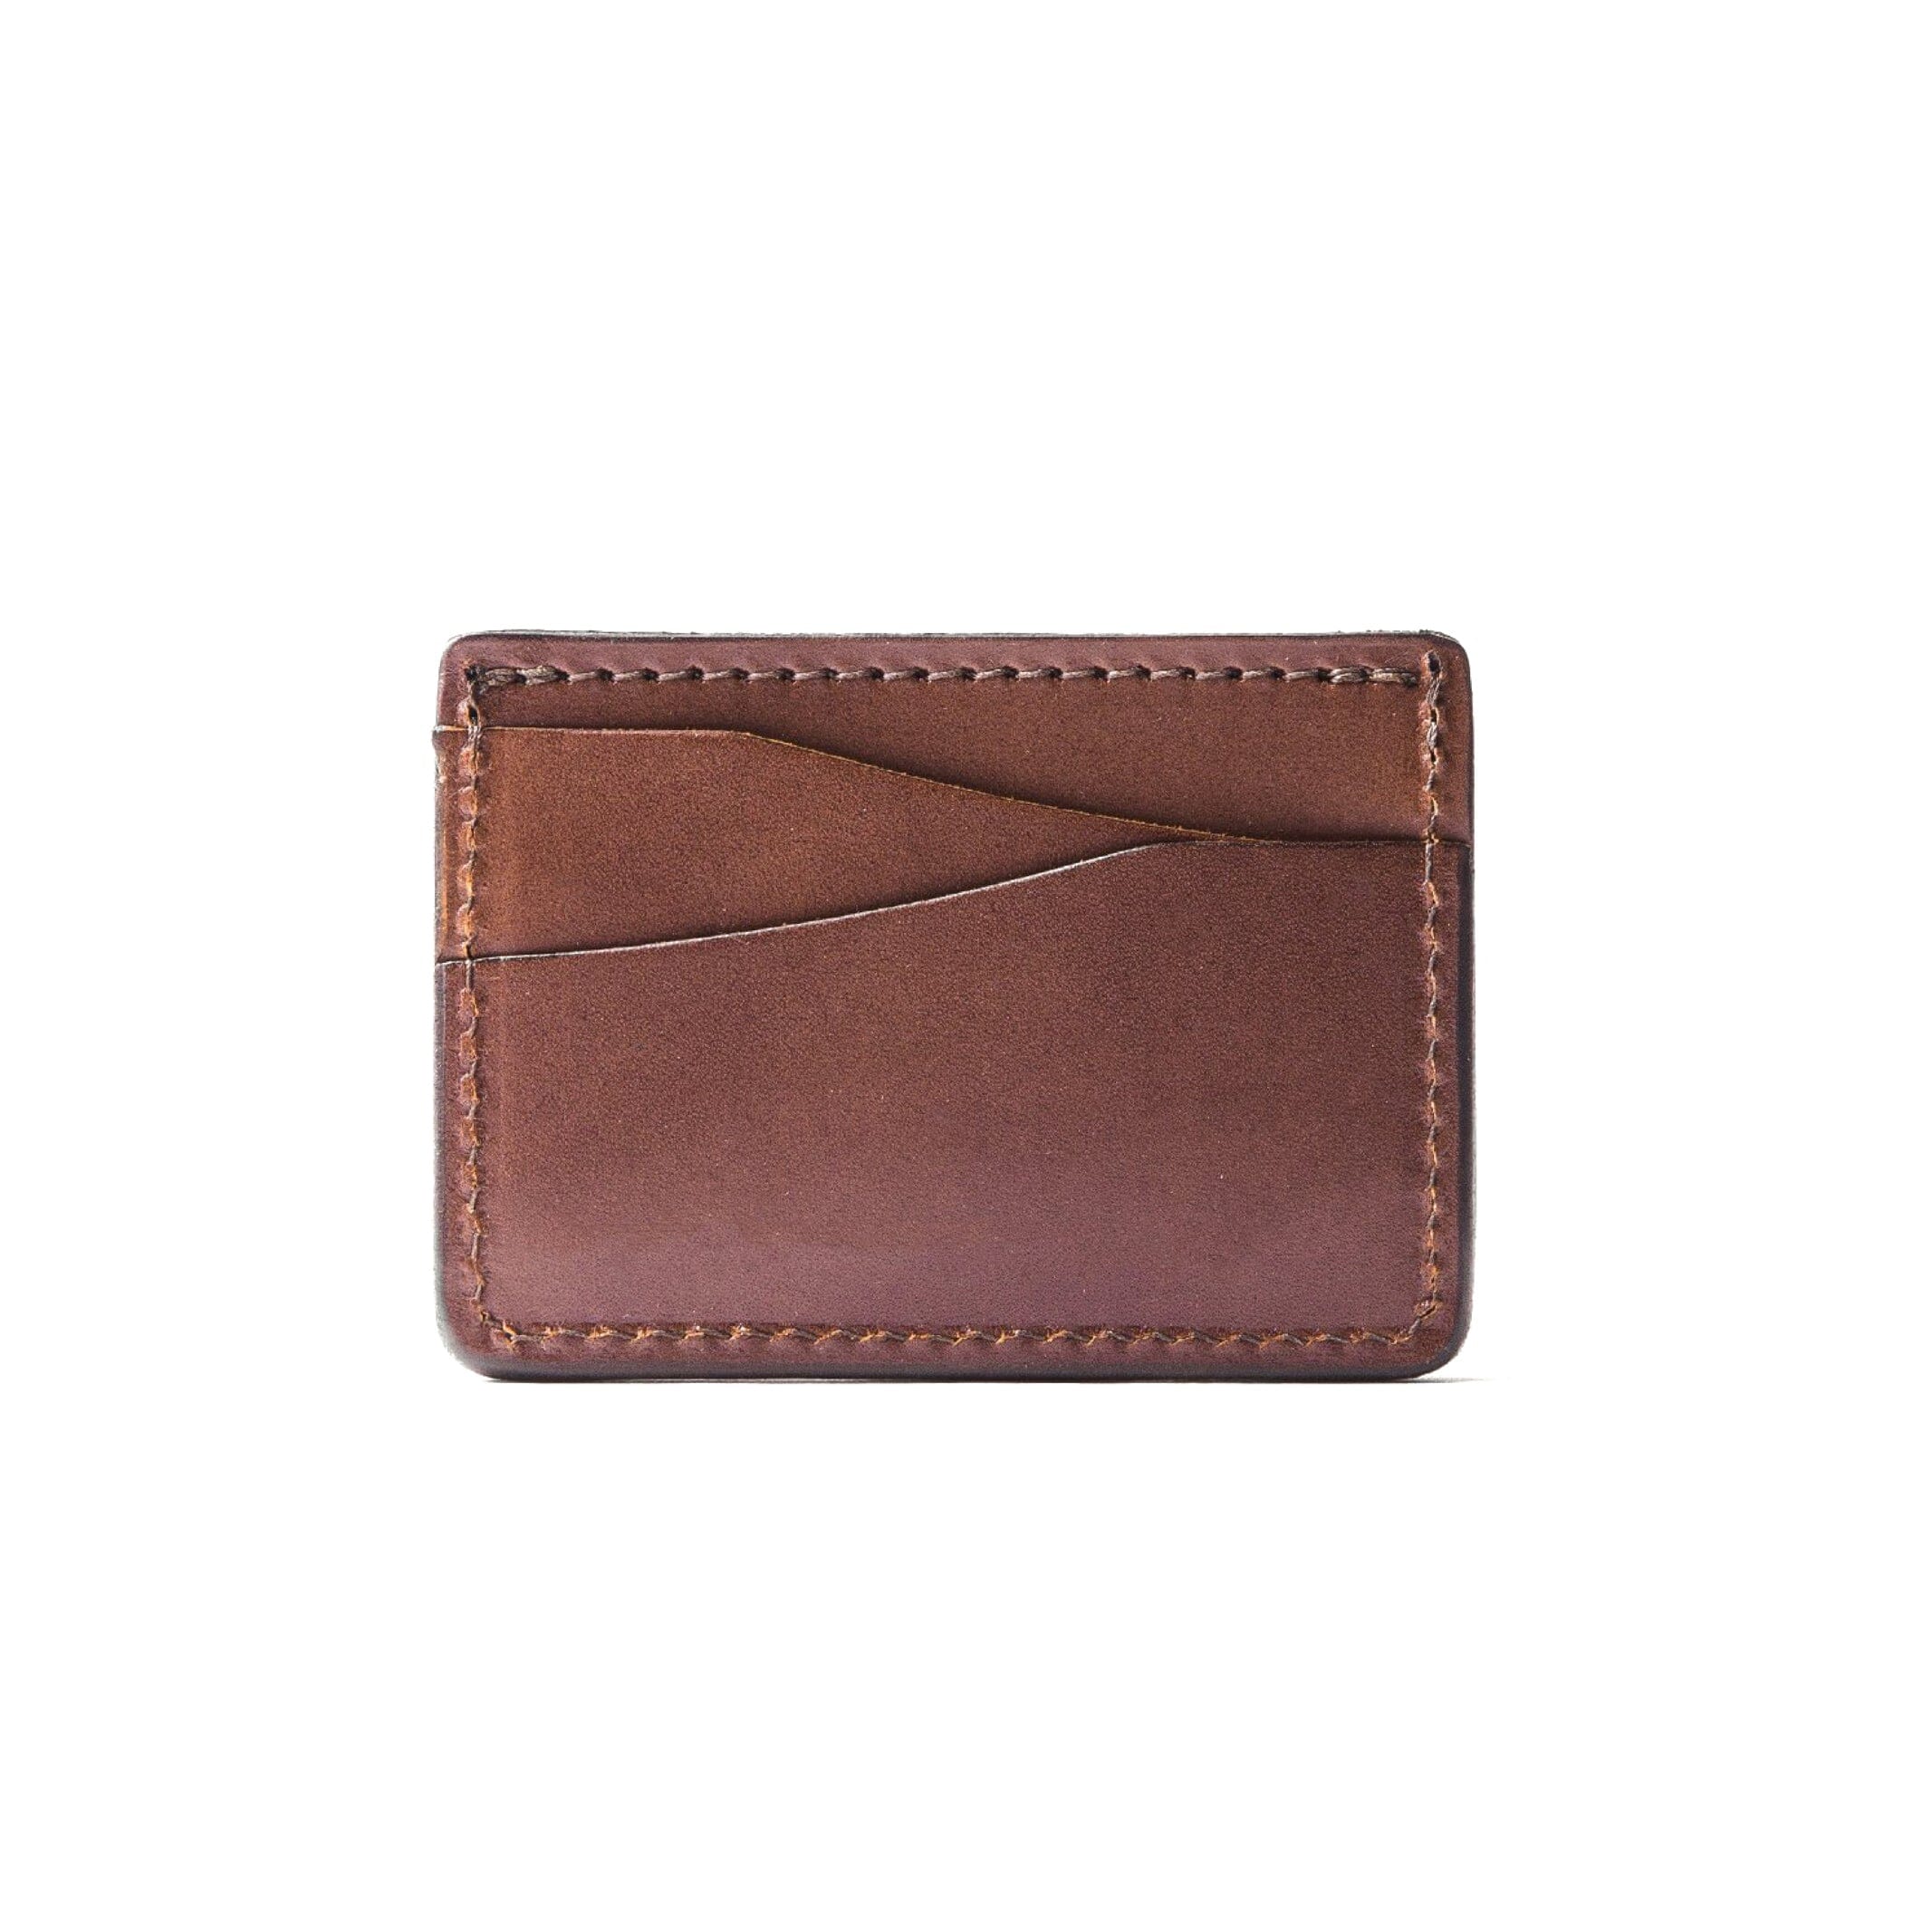 Minimalist Bifold Wallet in Black Leather - Thursday Boot Company